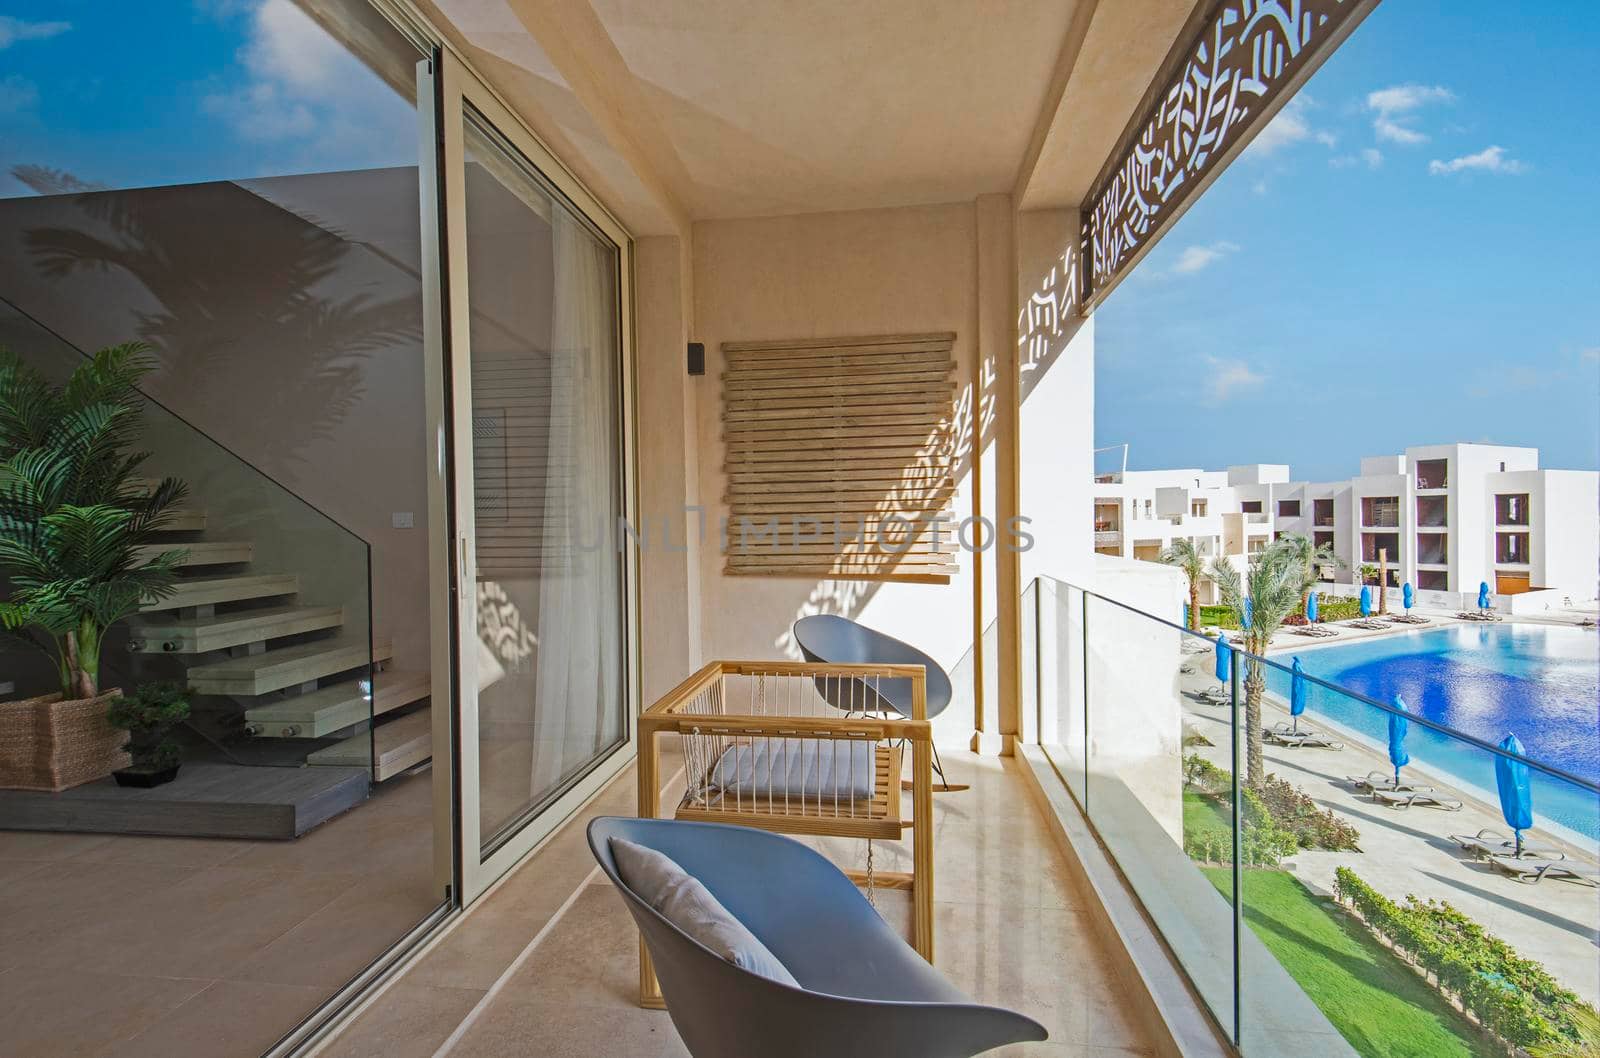 Terrace furniture of a luxury apartment in tropical resort with table and chairs on balcony over swimming pool view